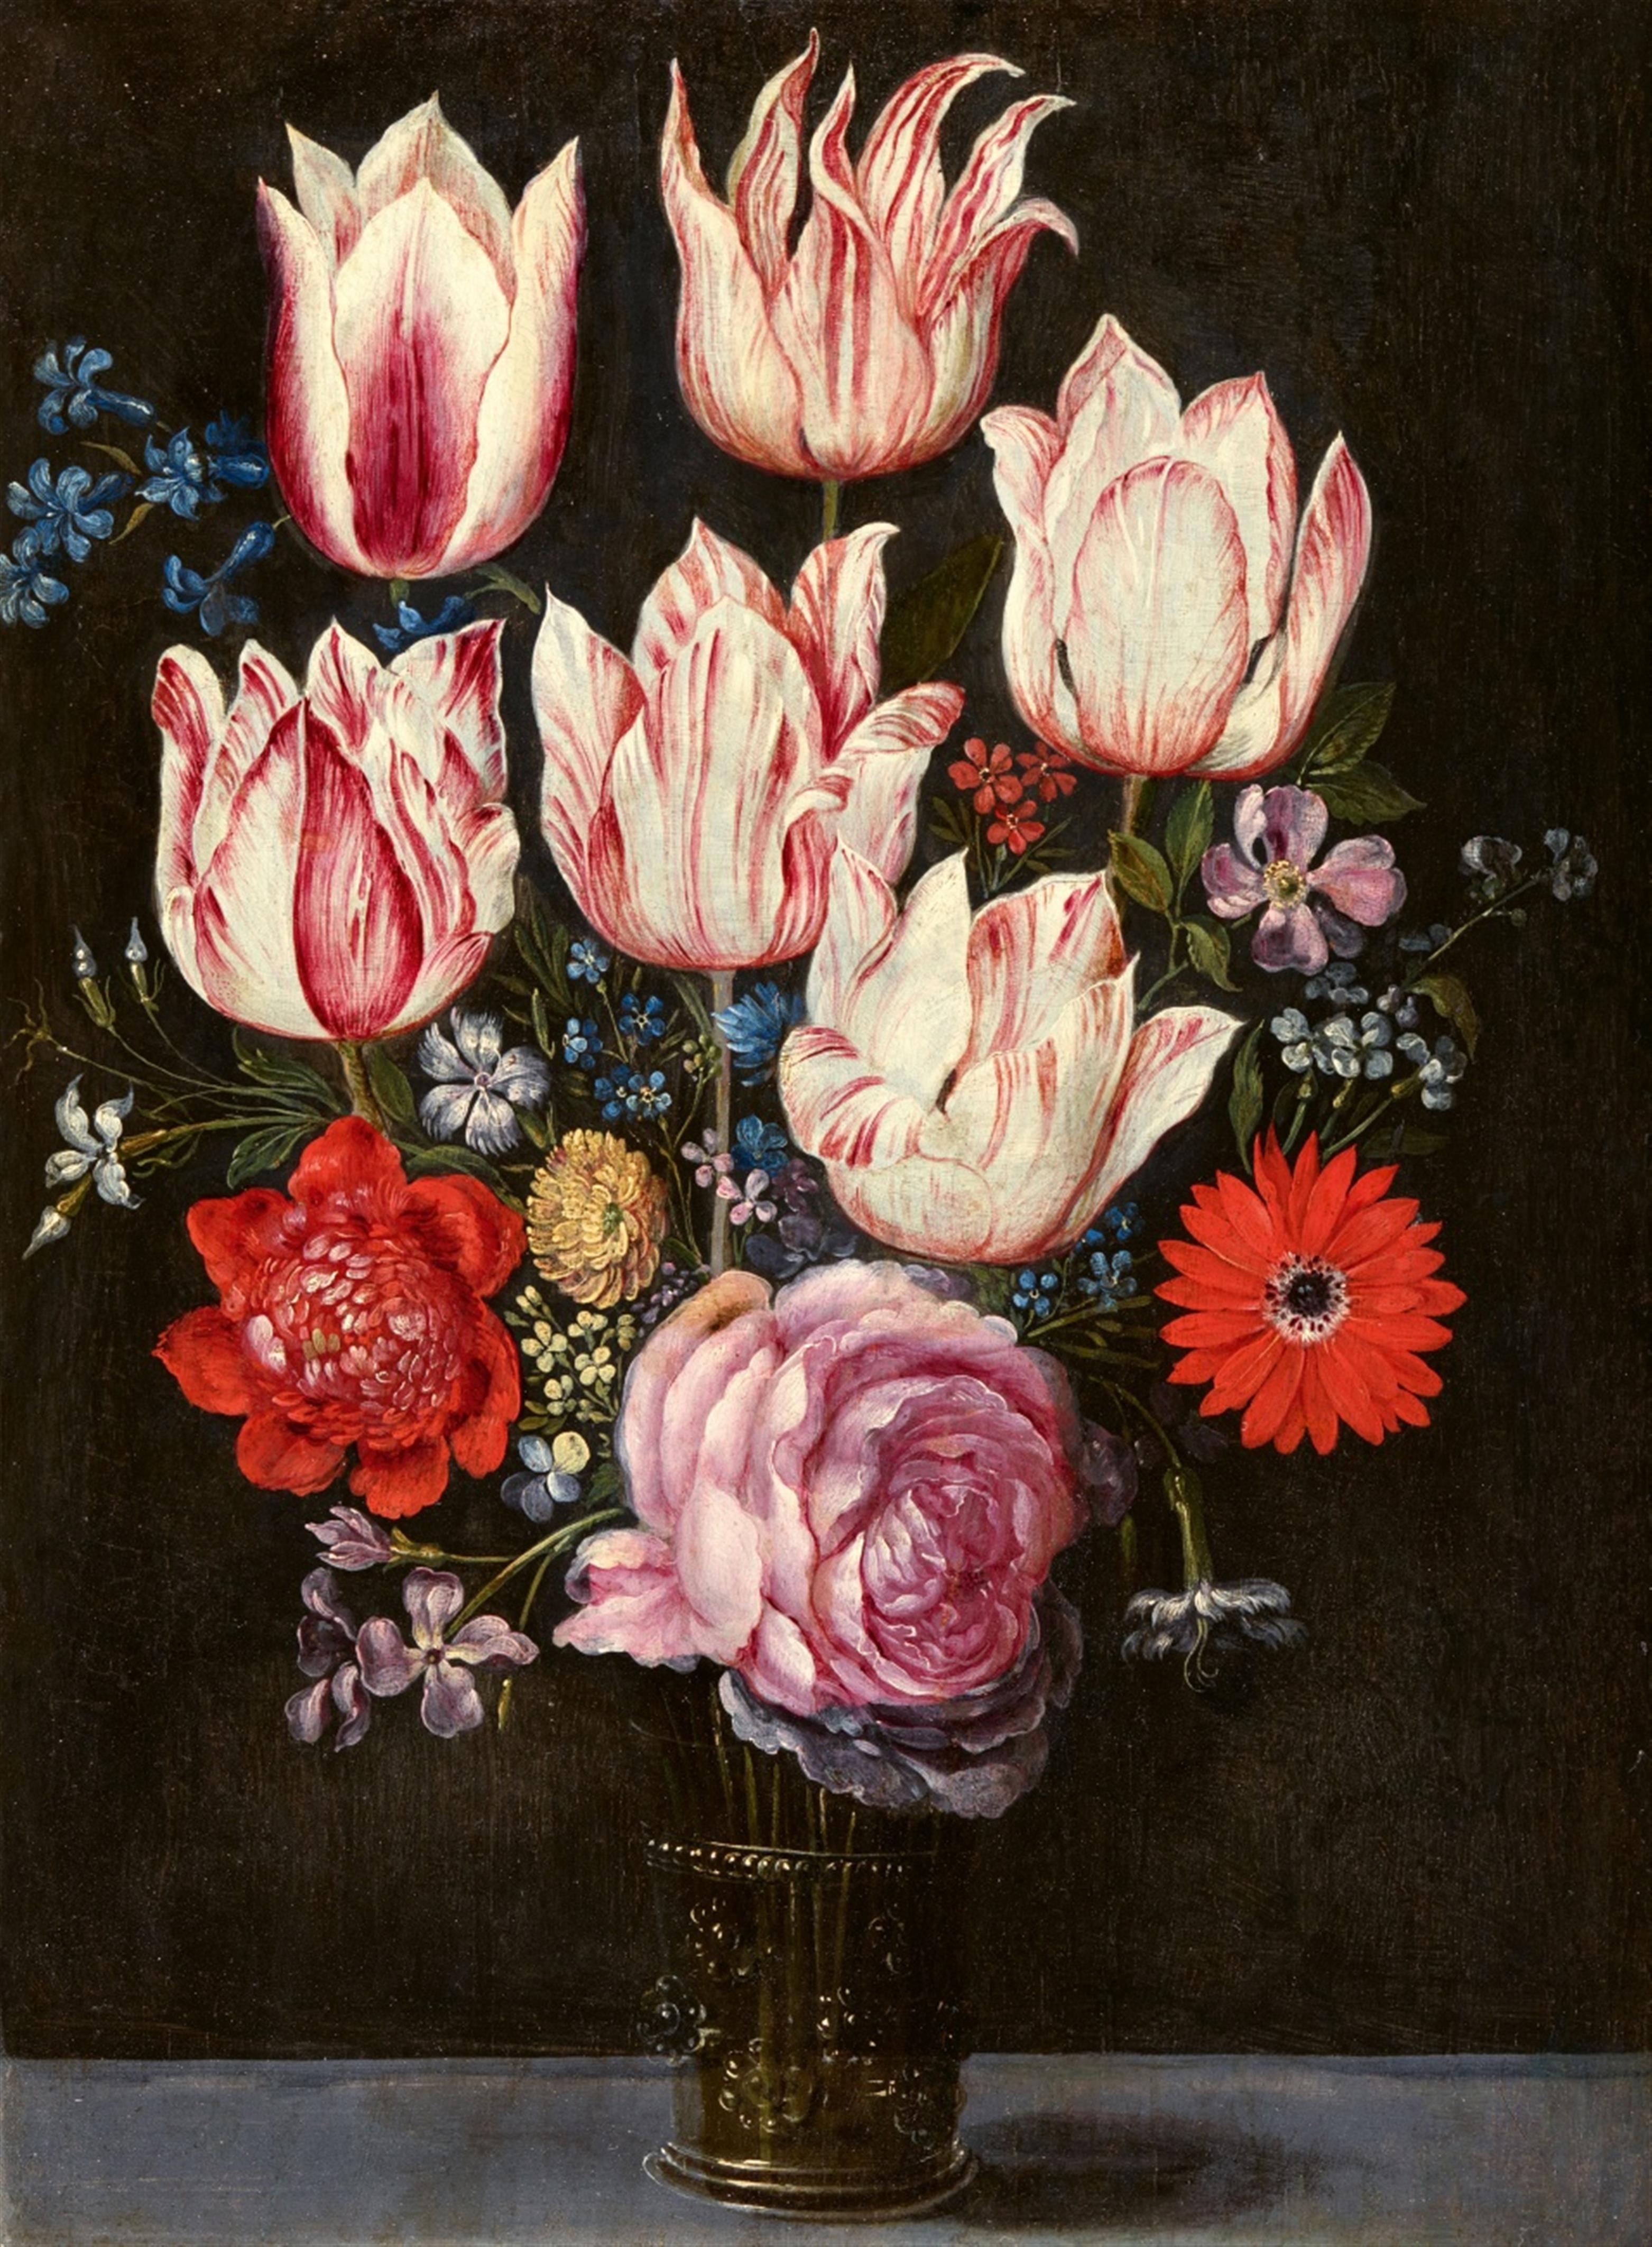 Philipp Marlier and workshop, attributed to - Flower Still Life with Tulips in a Glass Vase - image-1